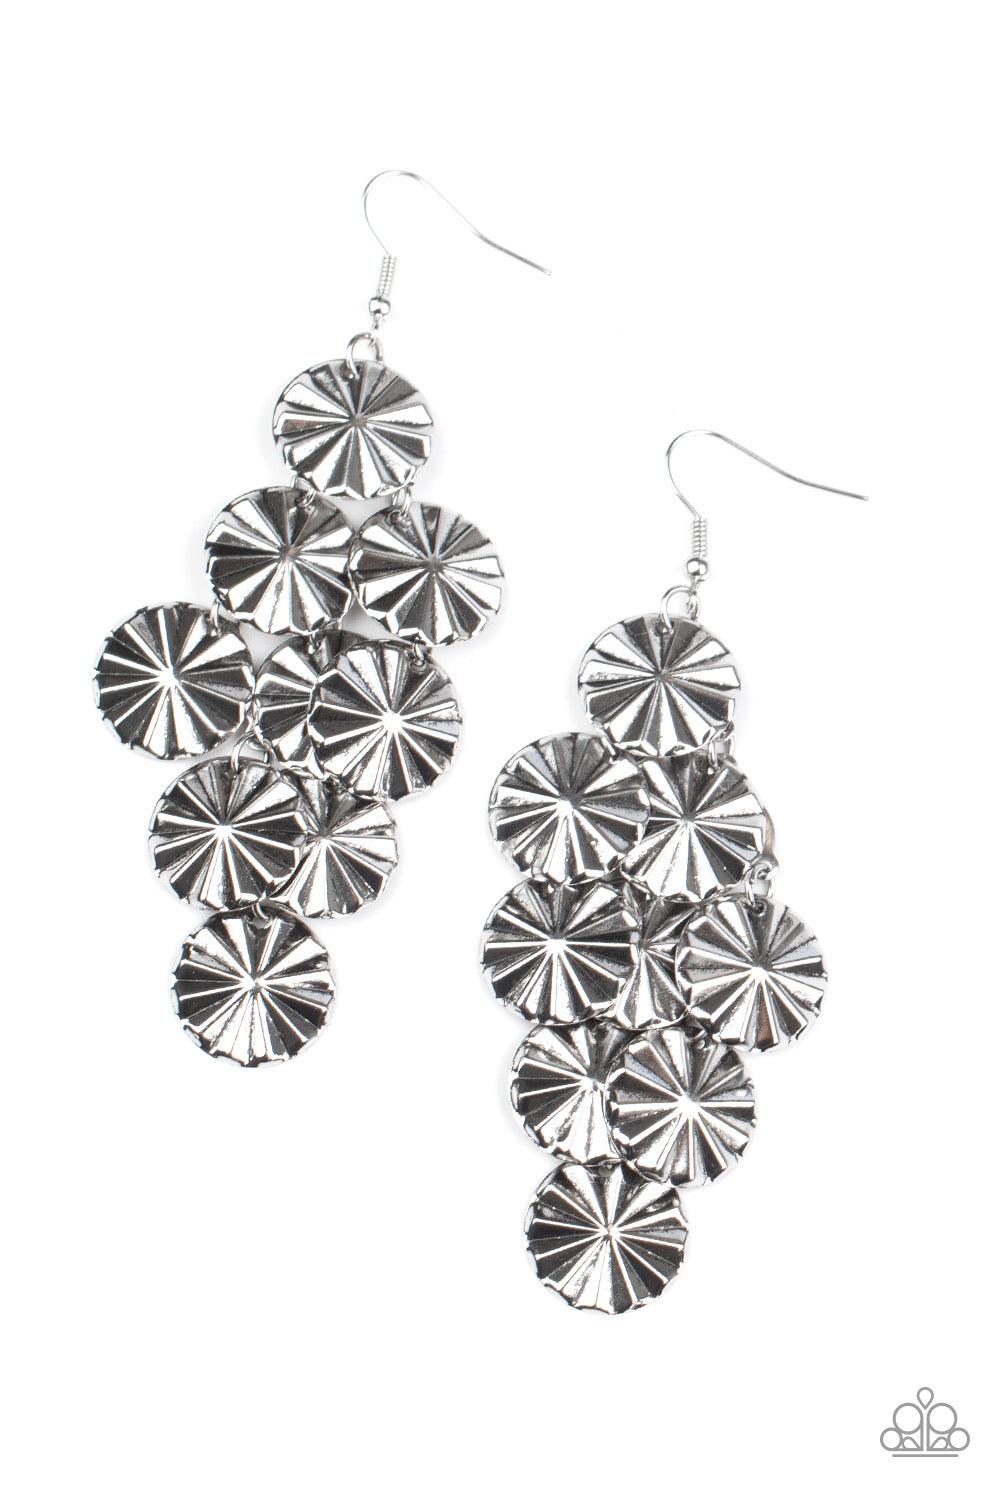 Paparazzi Accessories Star Spangled Shine - Silver Creased in star-like patterns, antiqued silver discs attach to a silver netted backdrop, linking into an edgy lure. Earring attaches to a standard fishhook fitting. Sold as one pair of earrings. Jewelry